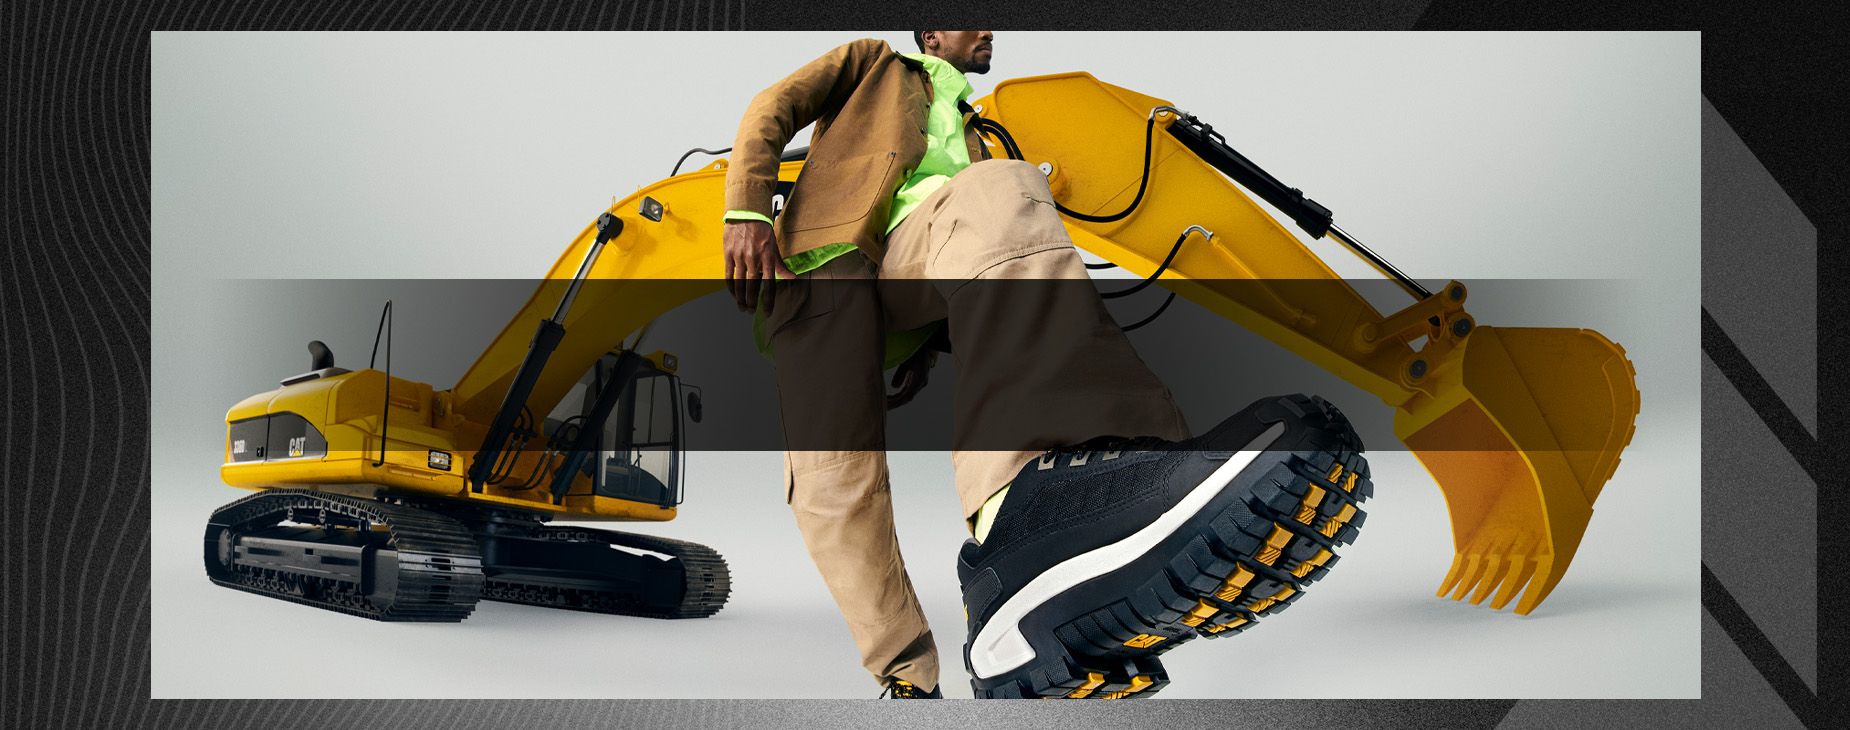 Dressed in khaki, standing in front of an excavator, showing off a black & white Invader sneaker.